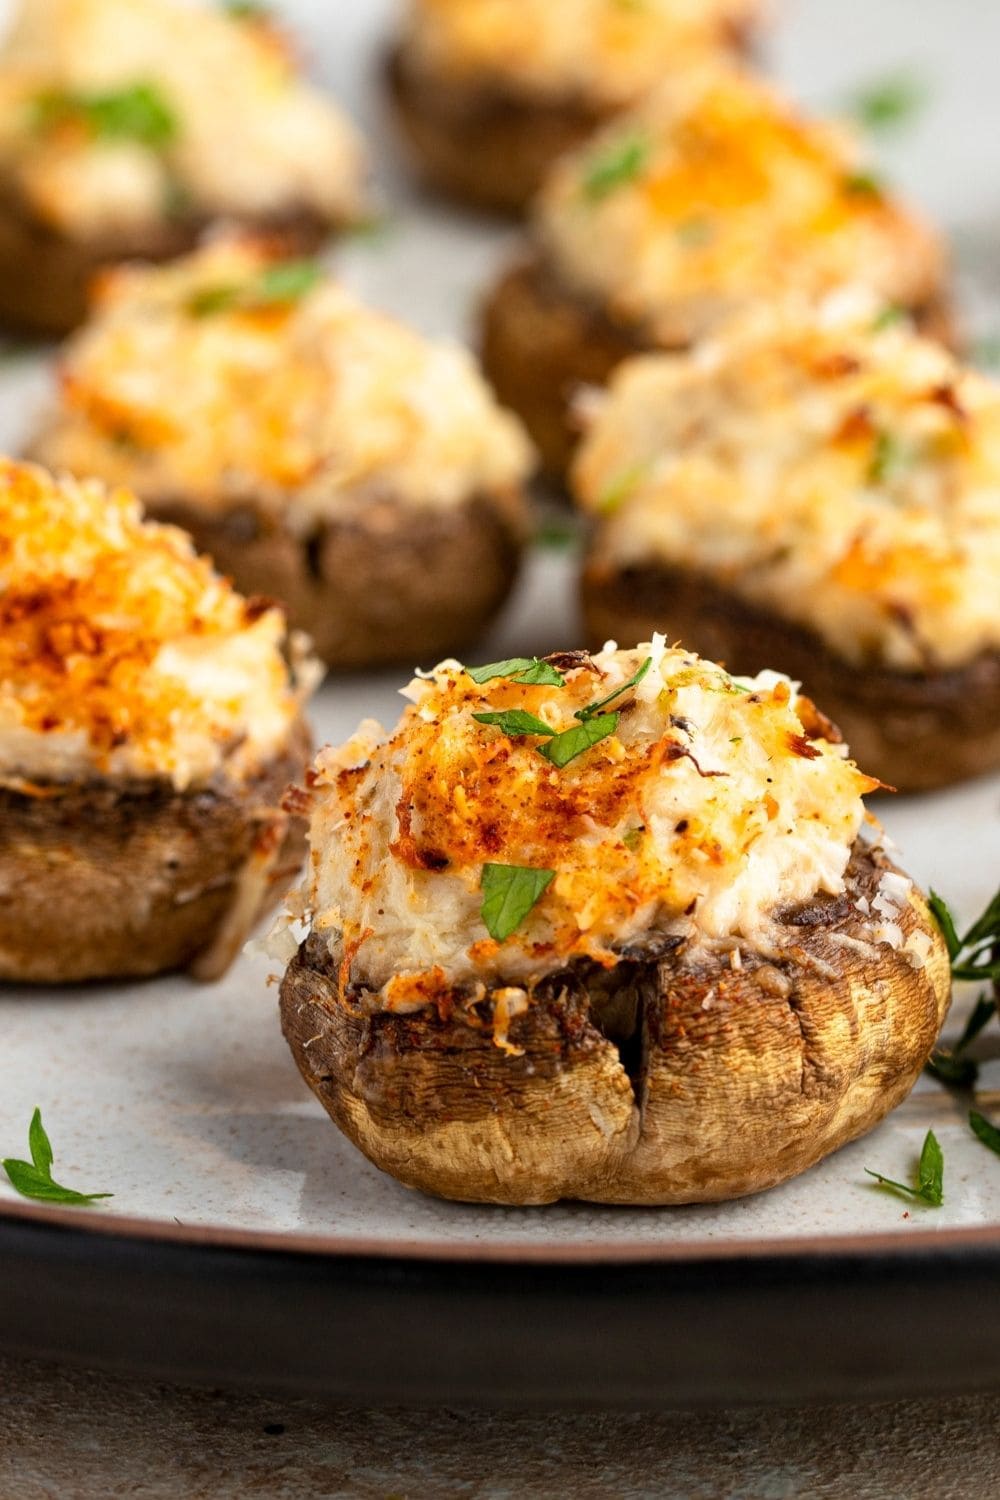 Mushroom stuffed with crab meat and cheese filling.